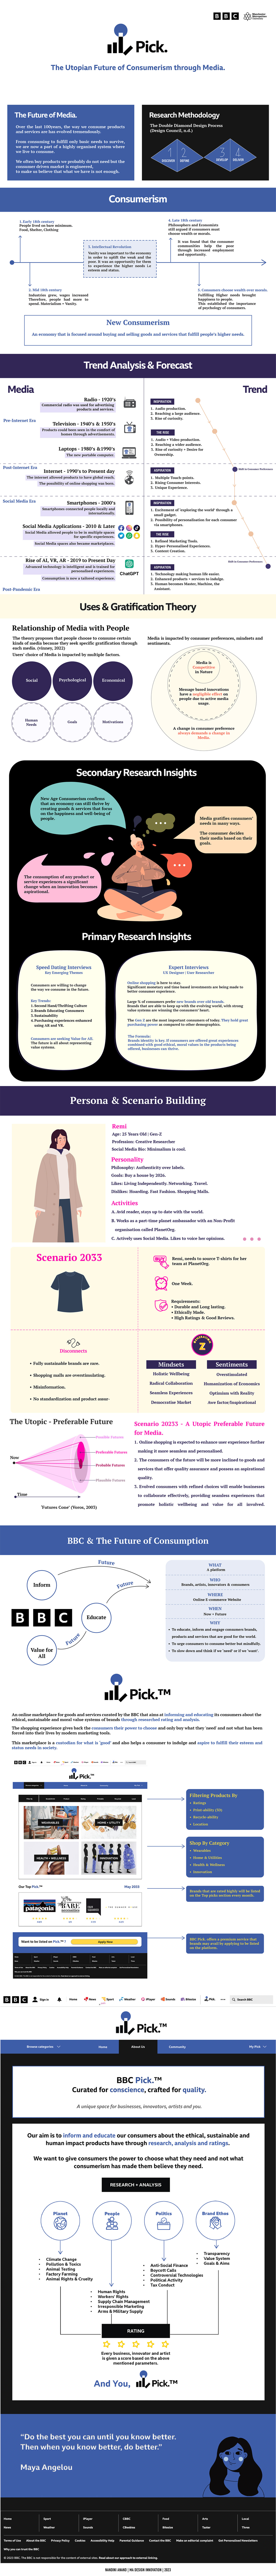 future research user experience consumerism Figma UI/UX Collaboration Fashion  BBC online shopping